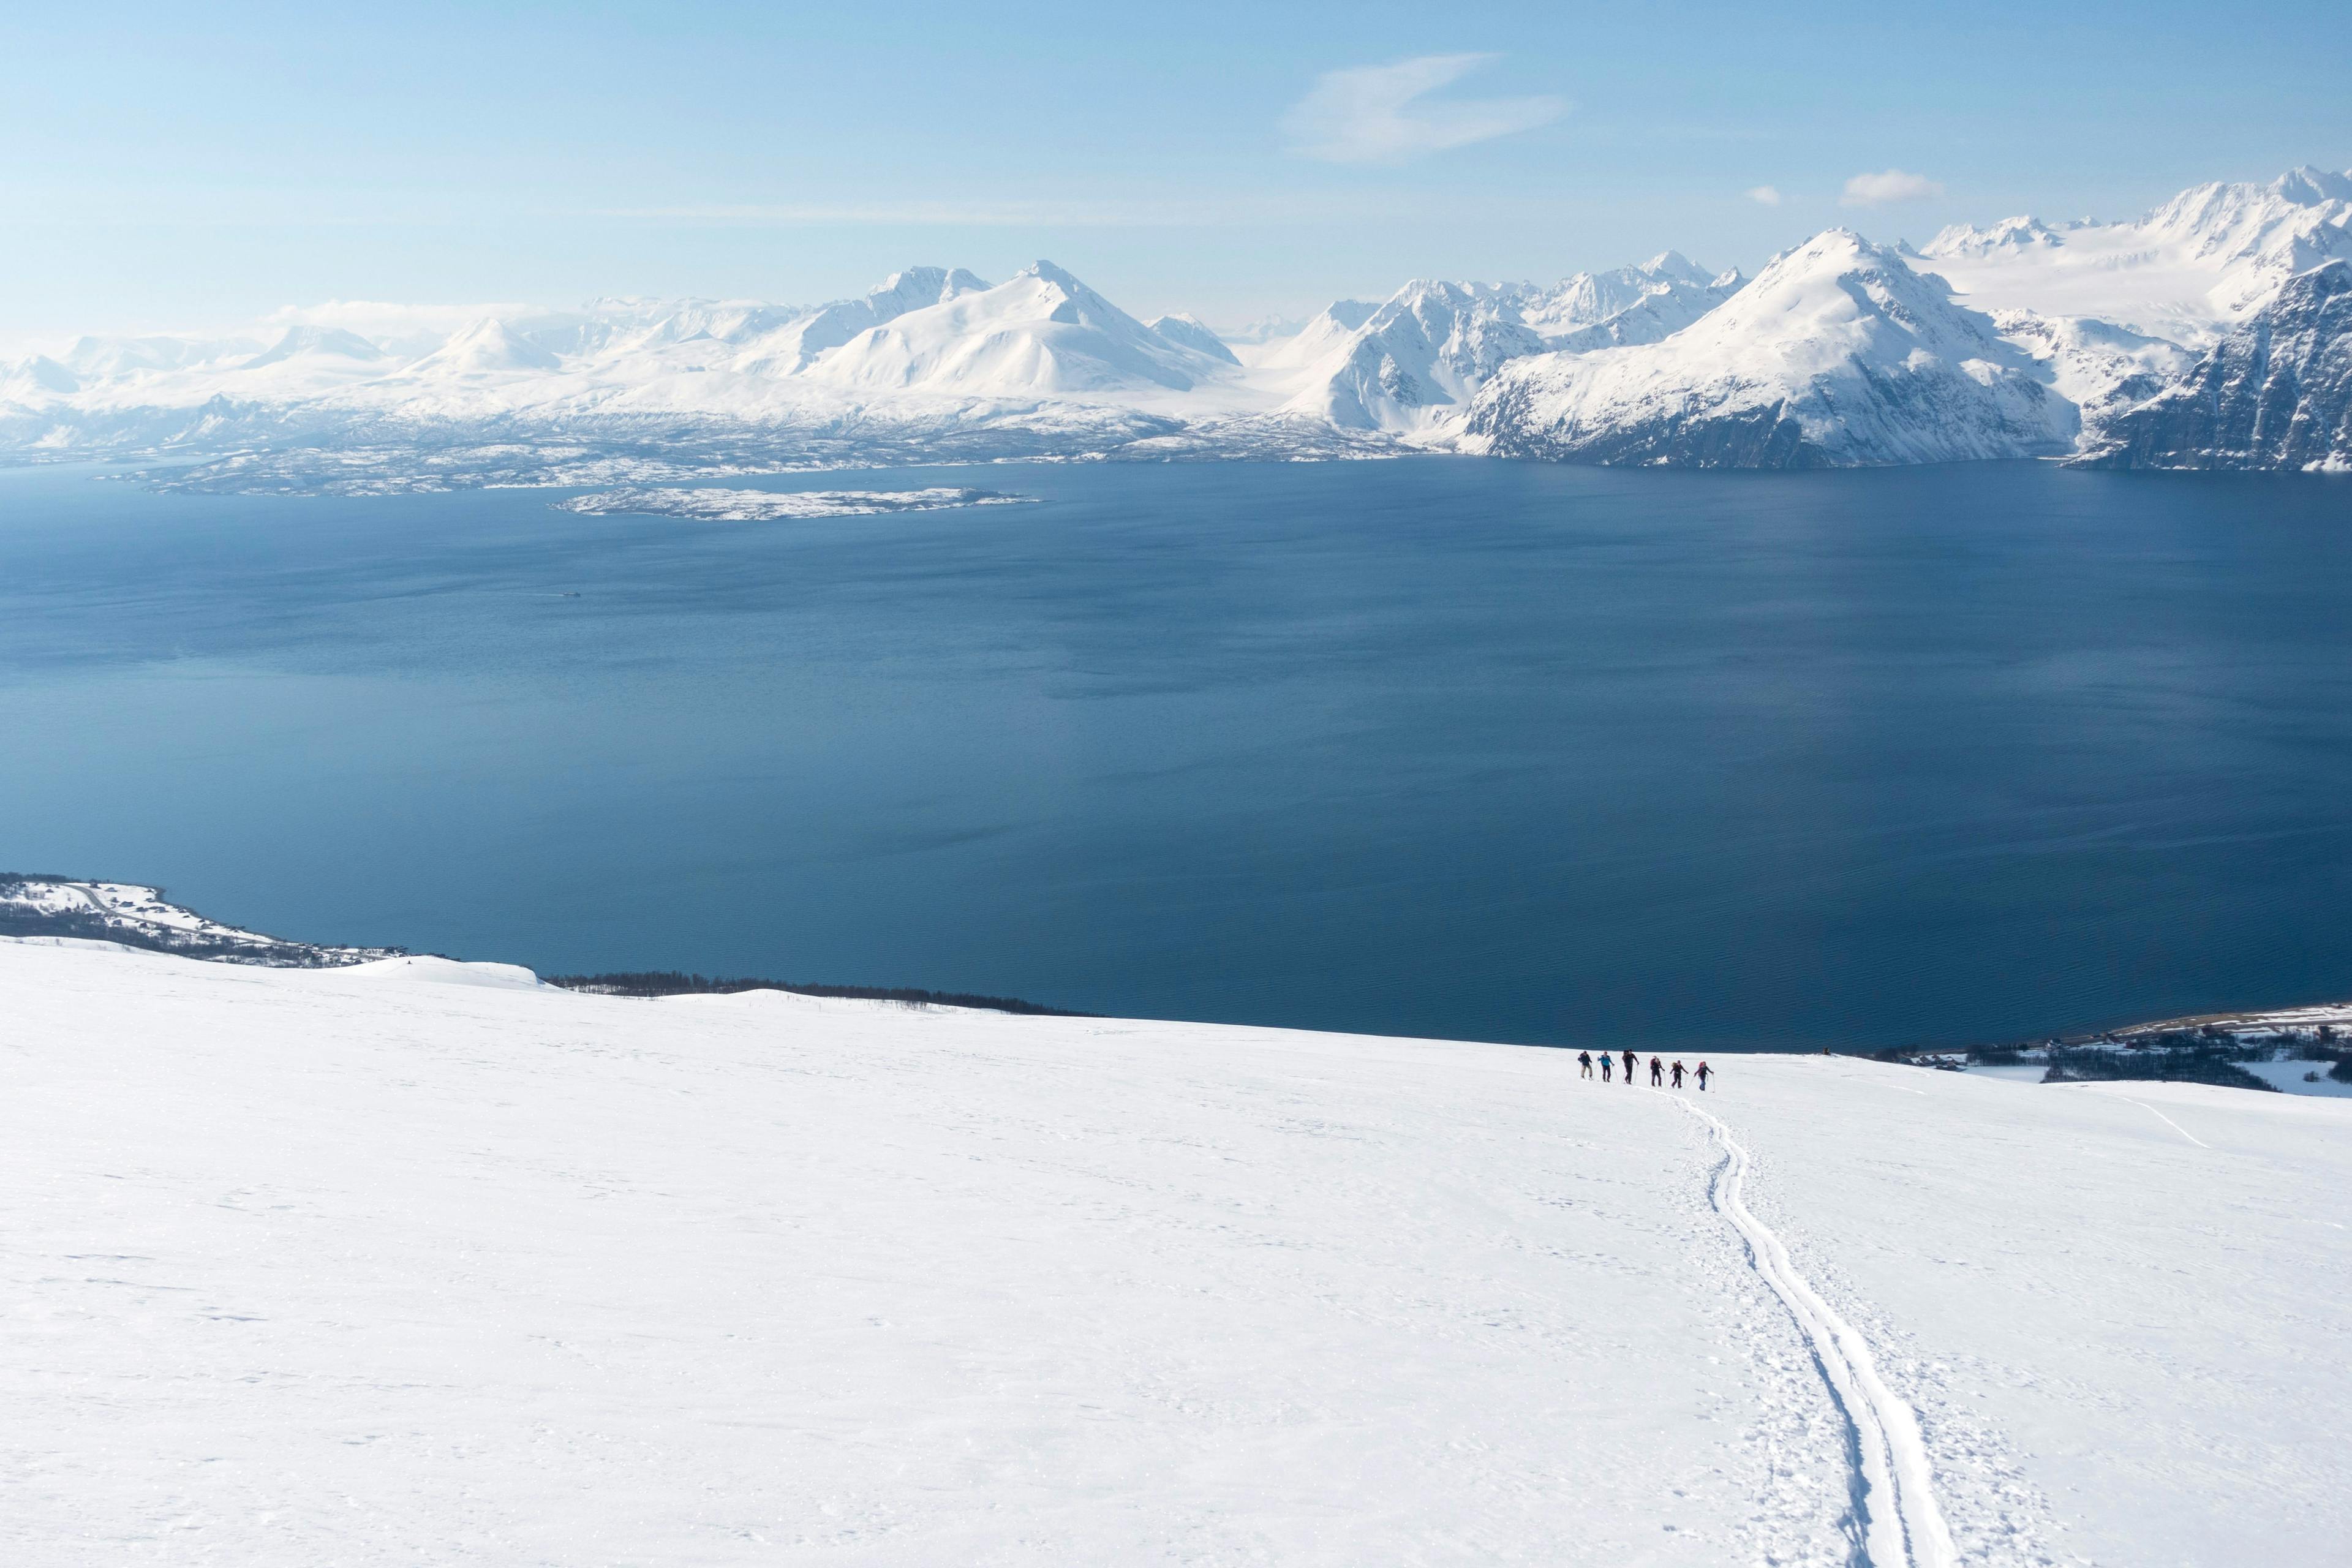 A group of 6 friends ski touring in the Lyngen Alps